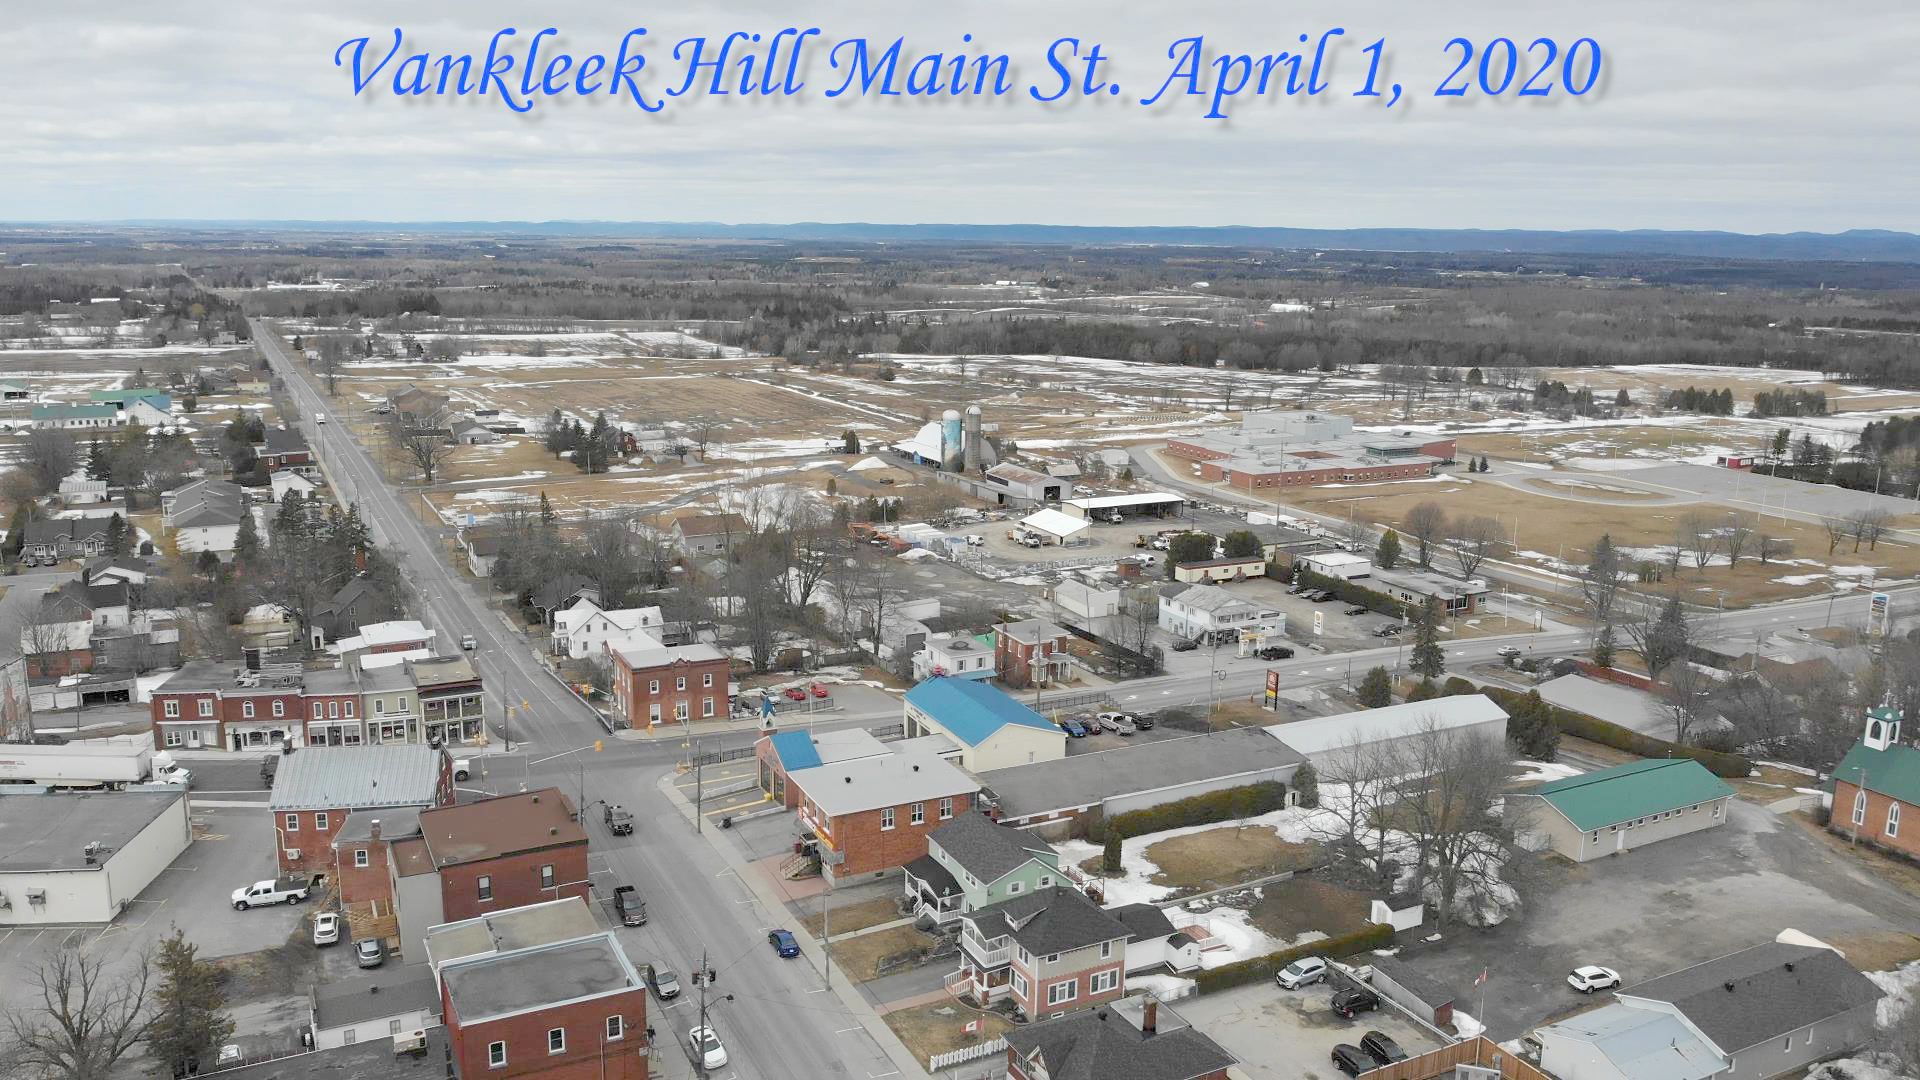 A view from up here: A look around Vankleek Hill